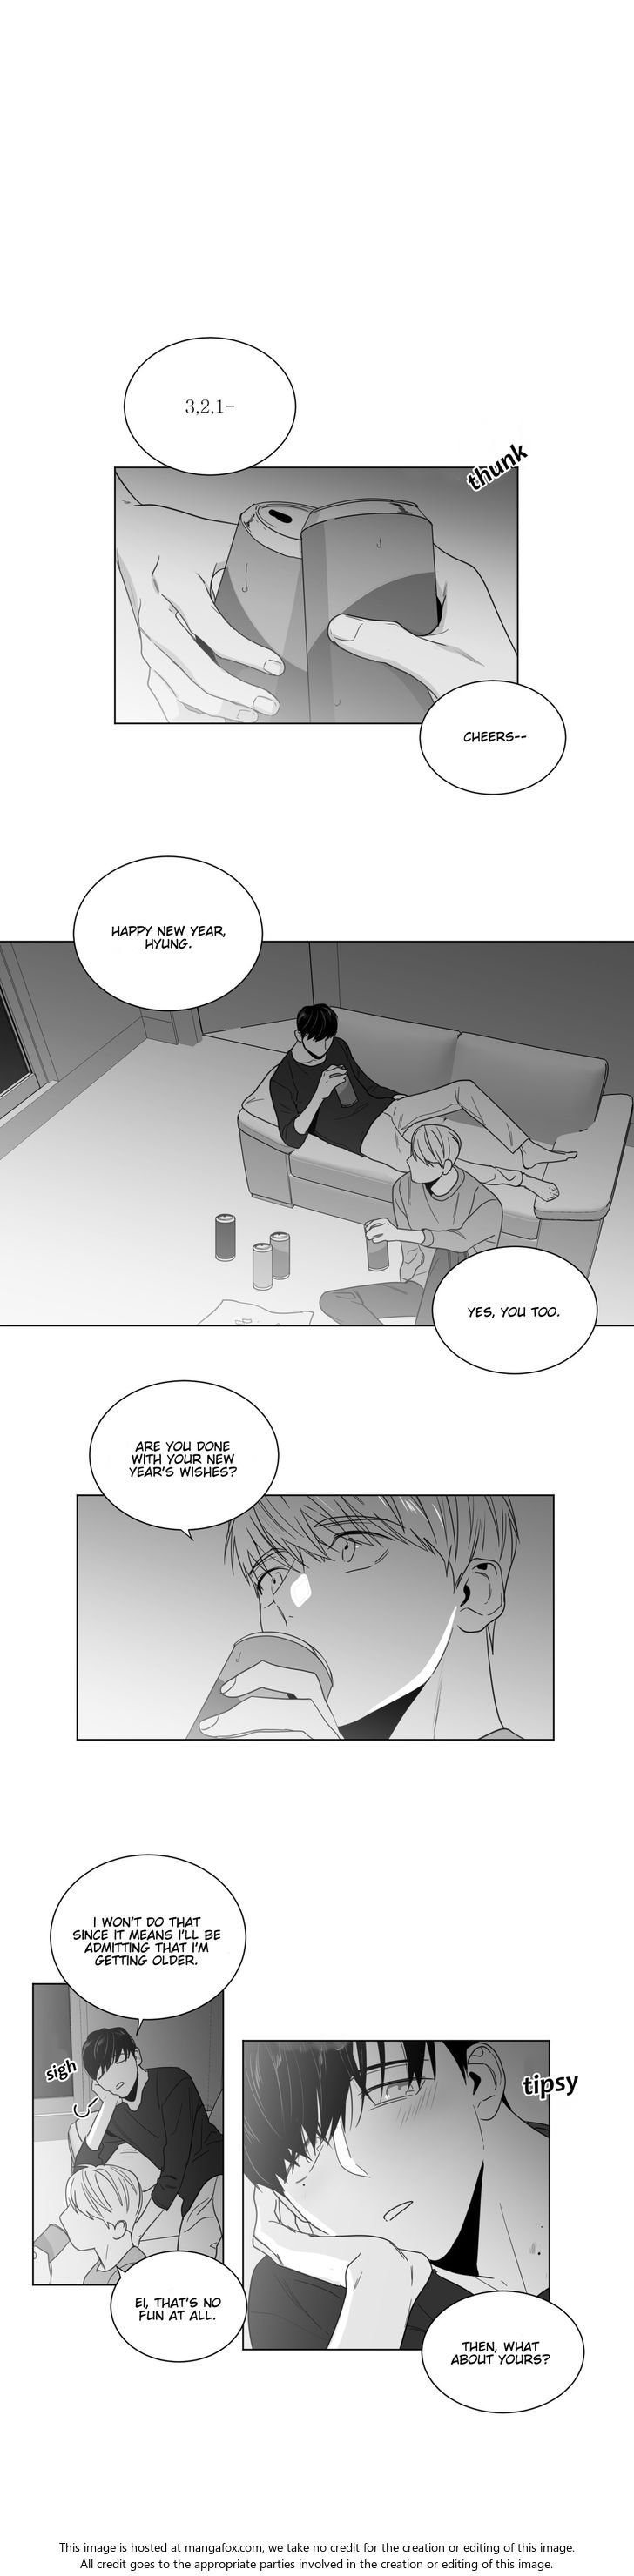 Lover Boy (Lezhin) Chapter 019 page 3